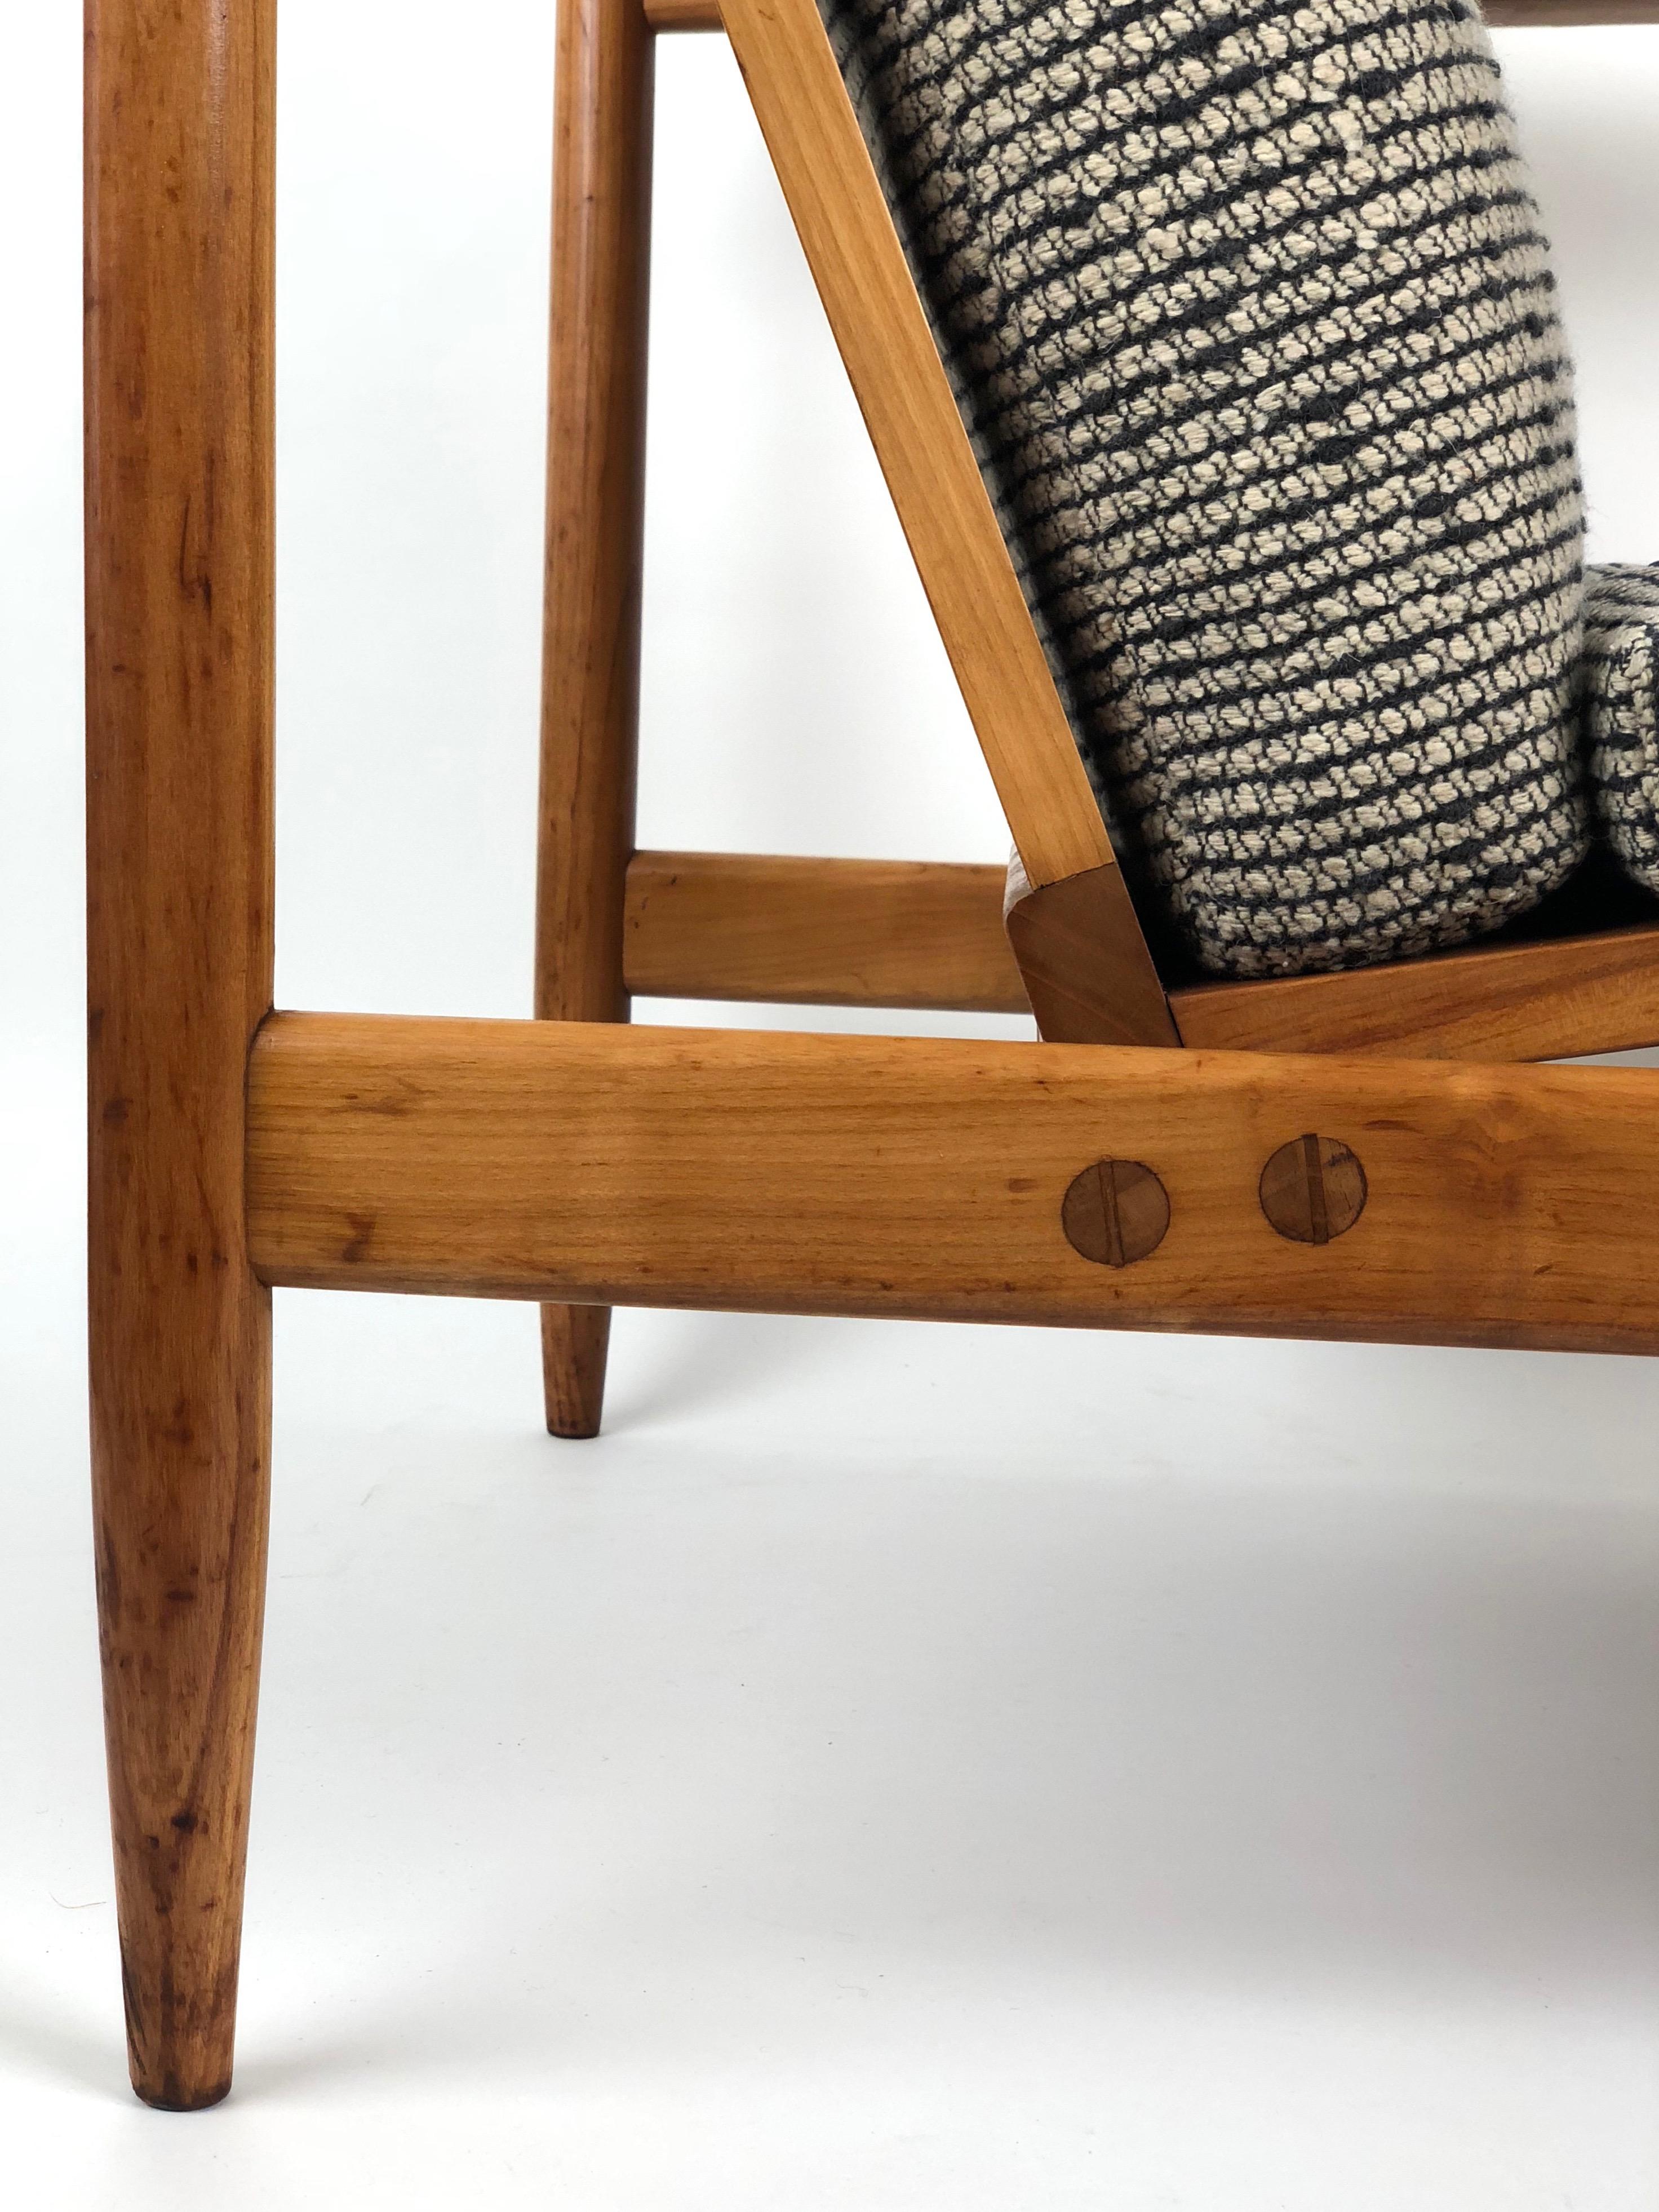 A beautiful arm chair from Uluv in cherrywood. Handmade by one individual from start to finish. The upholstery is original with padding made from sea grass. Sea grass was used by many manufacturers in Europe. Today it represents a biological